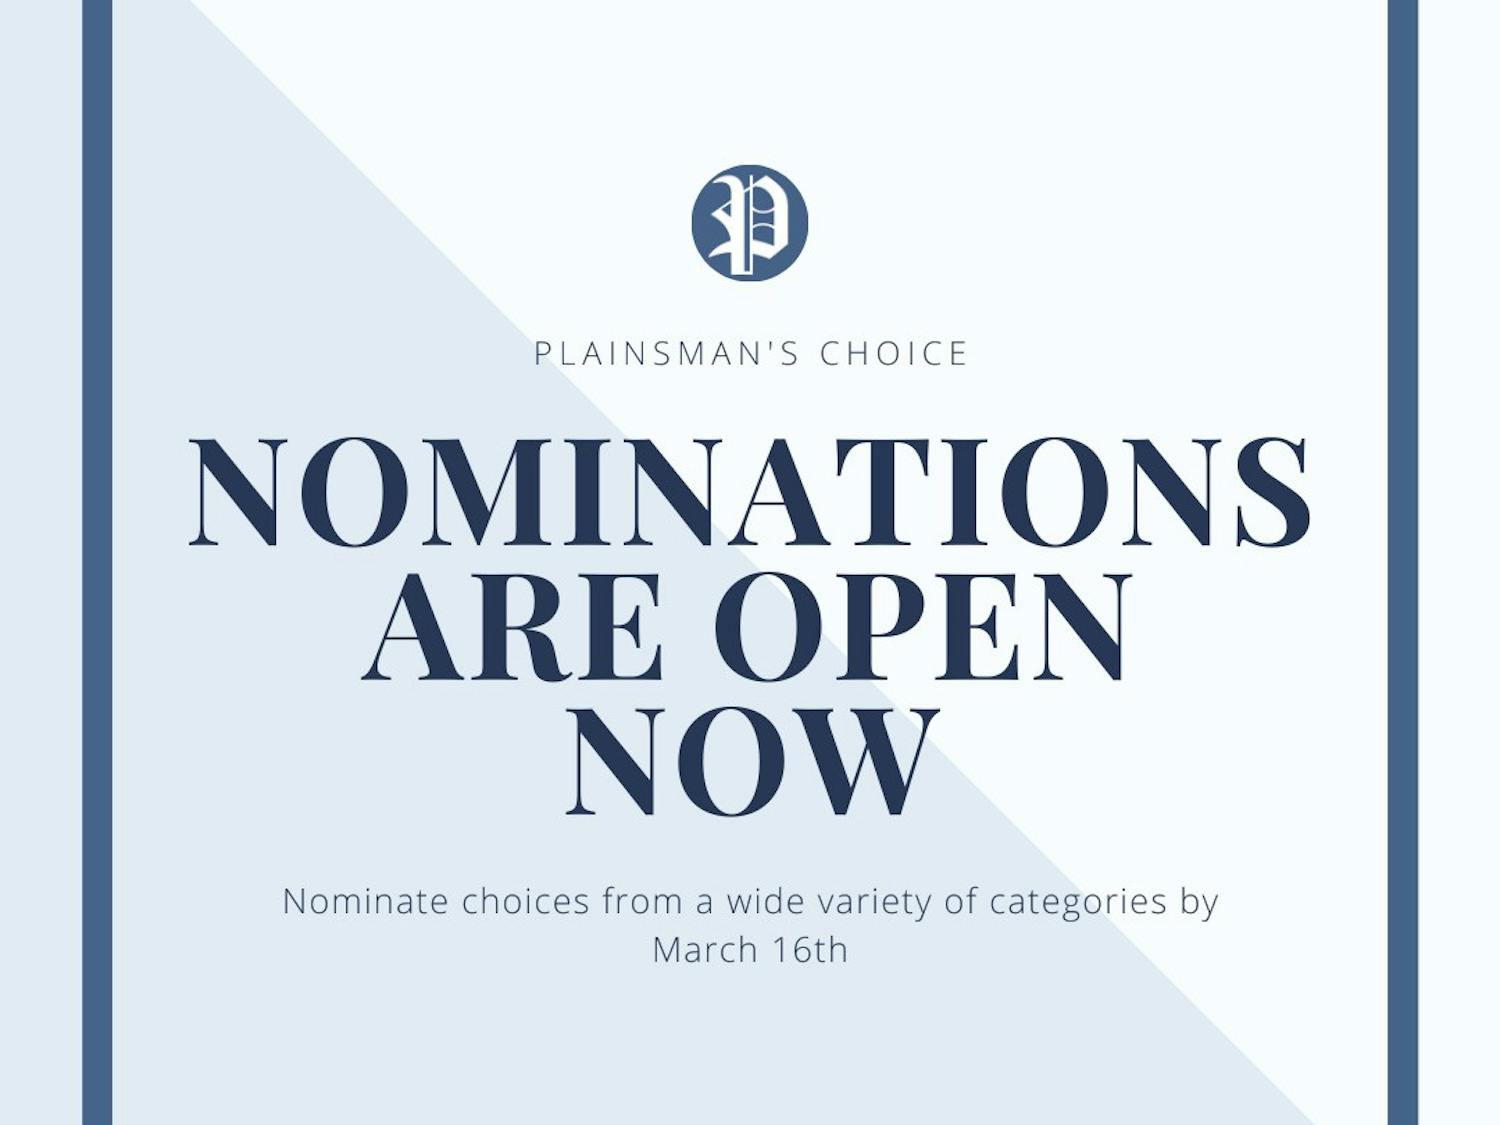 NOminations are open now